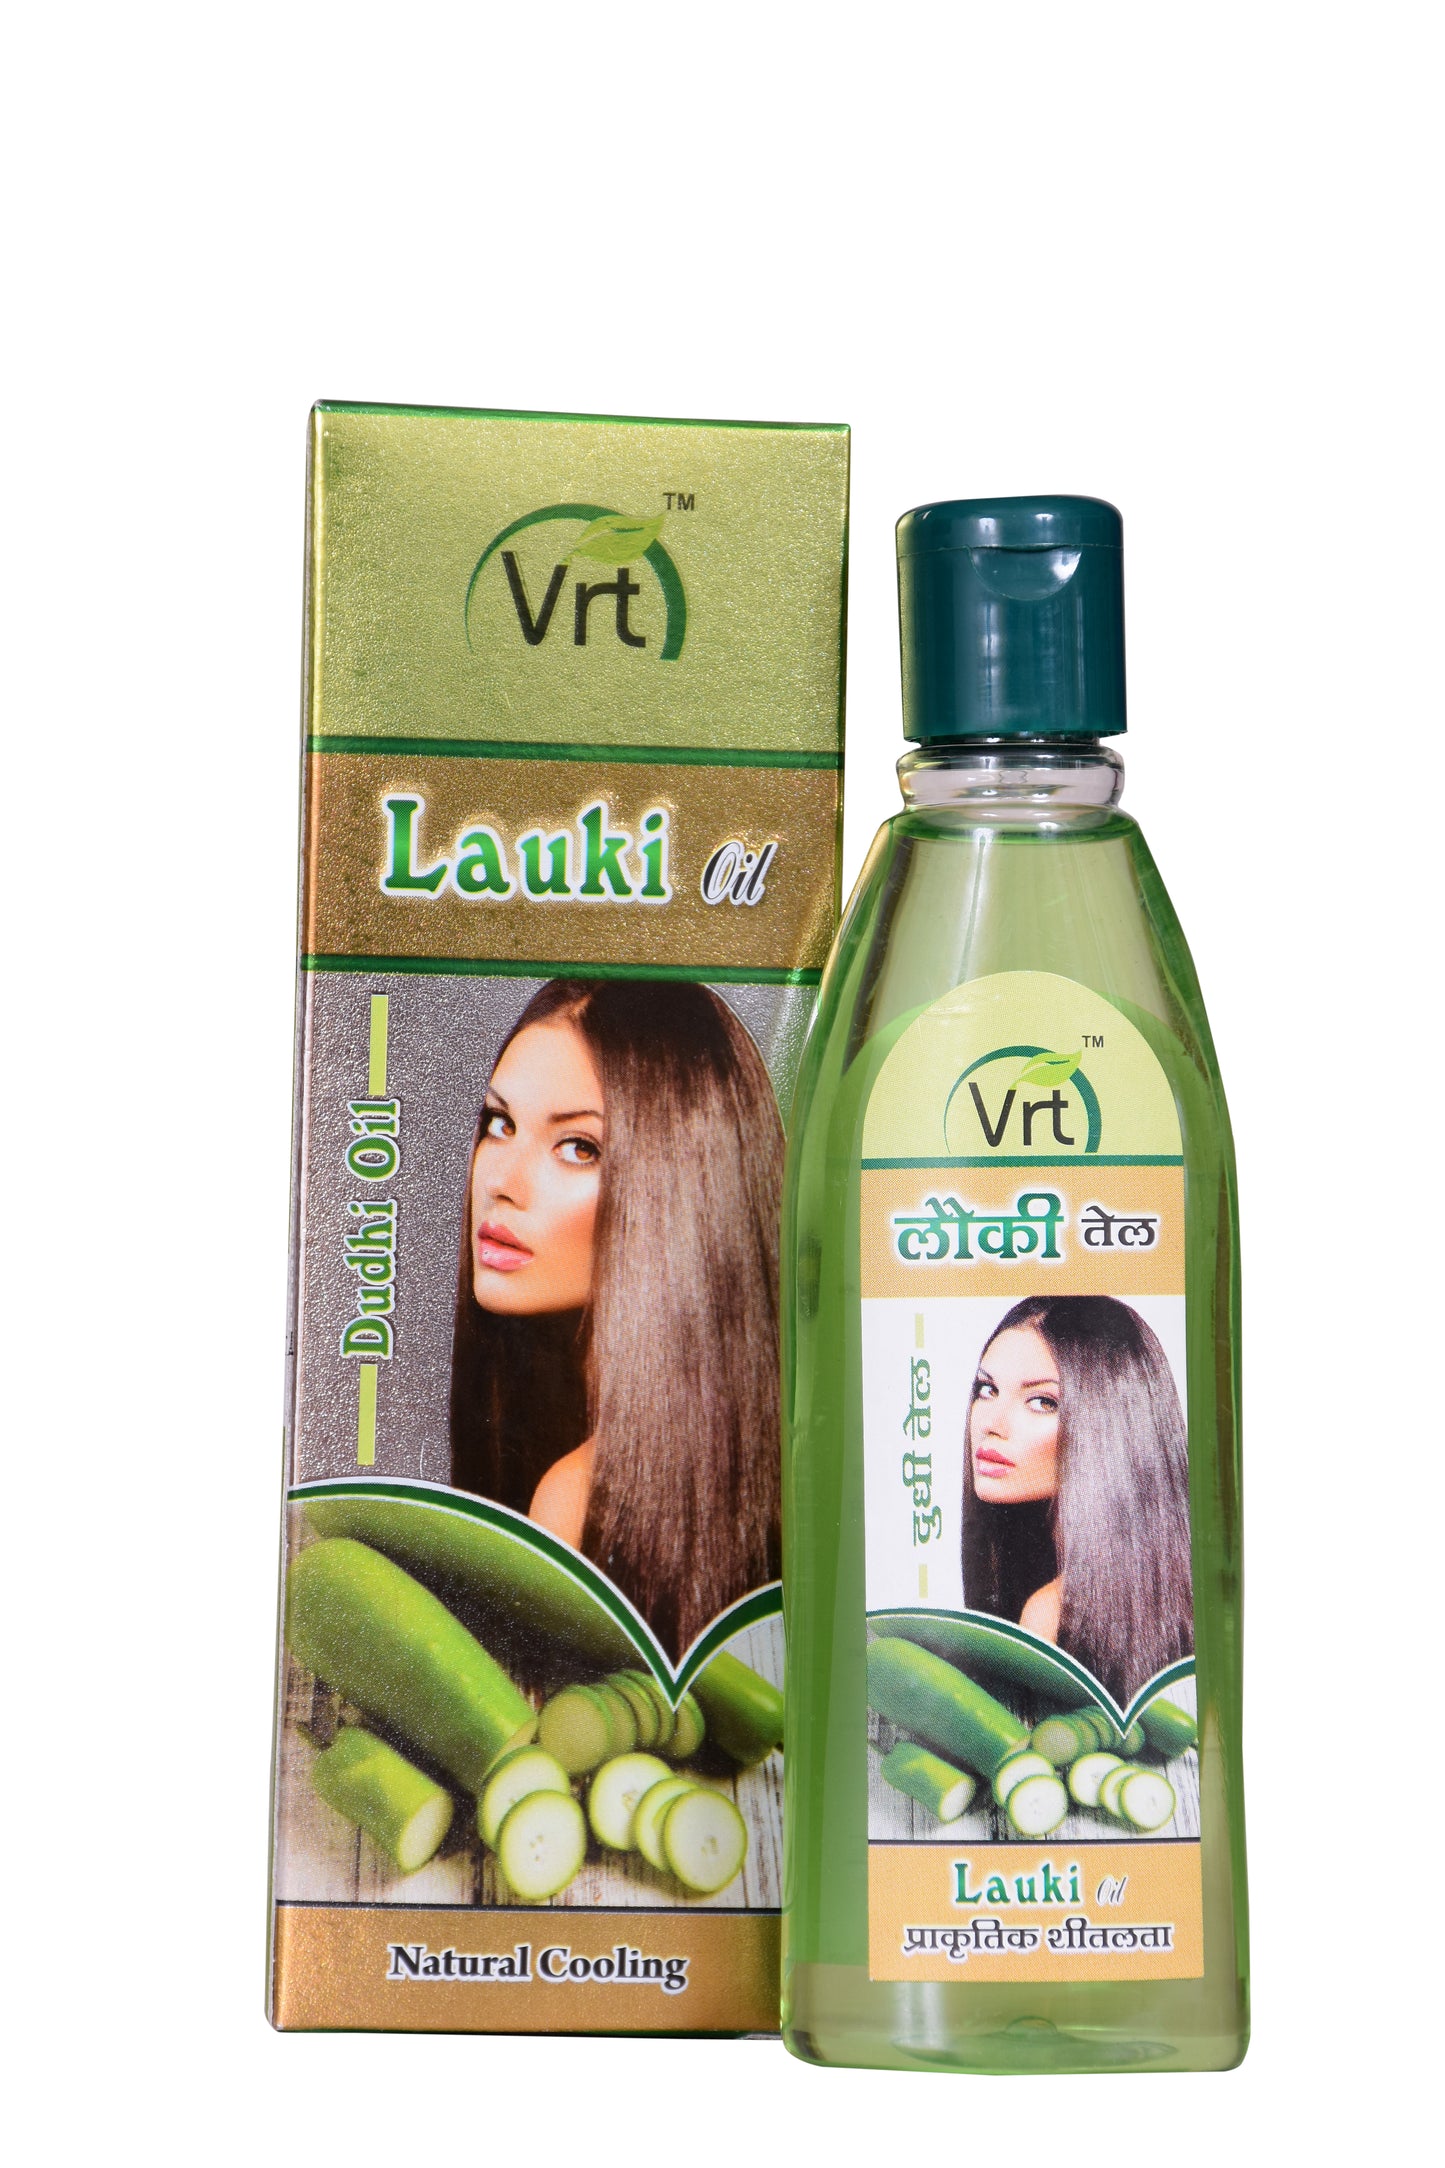 best cooling mind lauki tail, vrtherbal, 200ml bottle